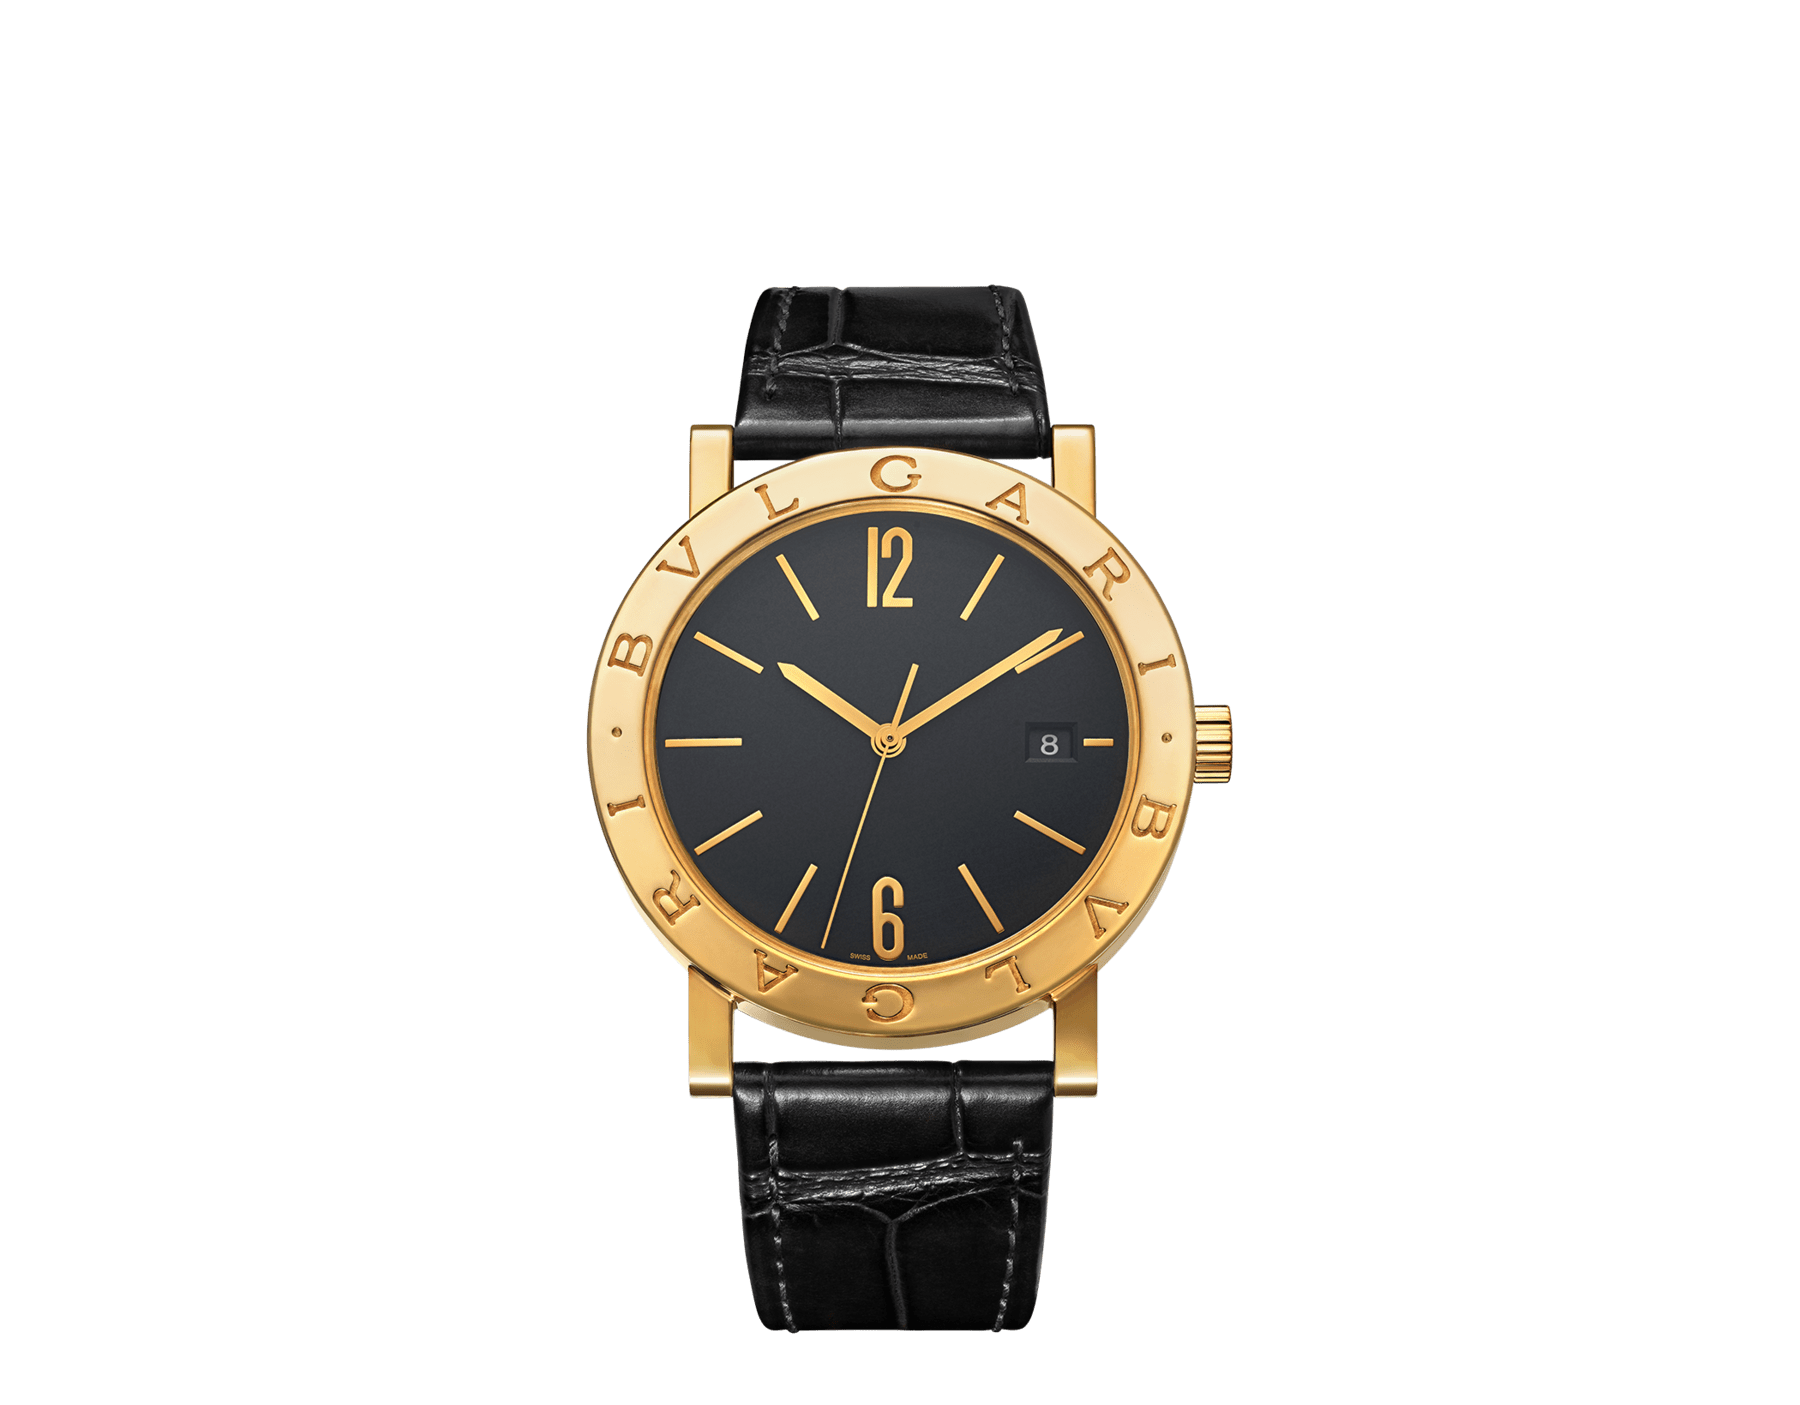 BULGARI BULGARI watch with mechanical automatic in-house movement, 18 kt yellow gold case and bezel engraved with double logo, black opaline dial and black alligator bracelet. Water resistant up to 50 meters 103967 image 1